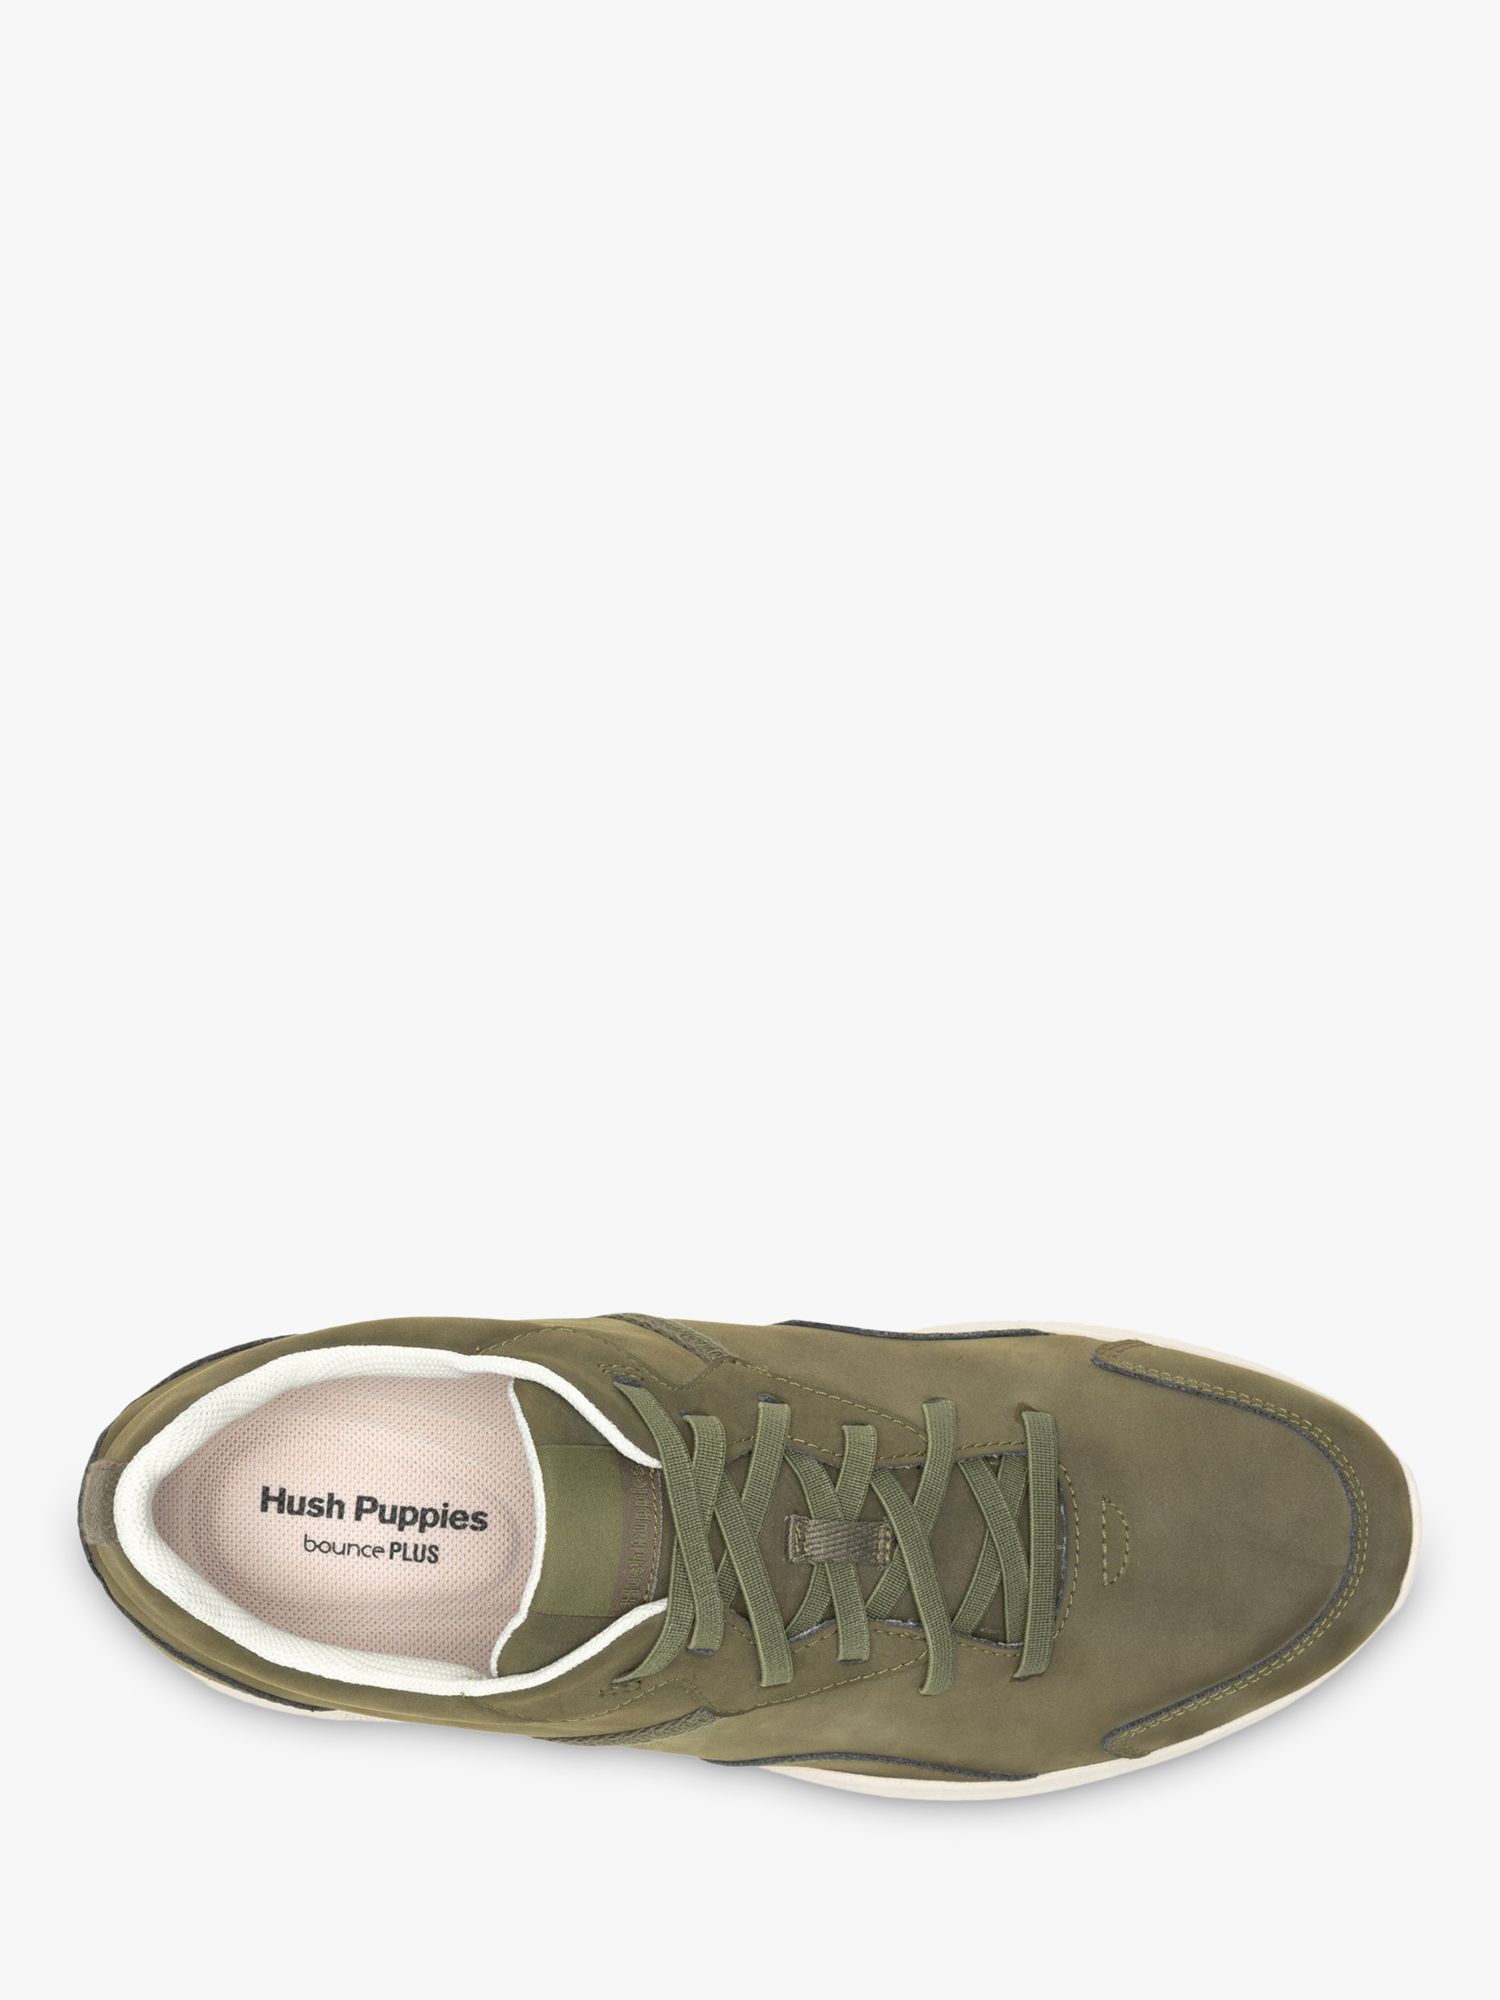 Buy Hush Puppies The Good Trainers Online at johnlewis.com